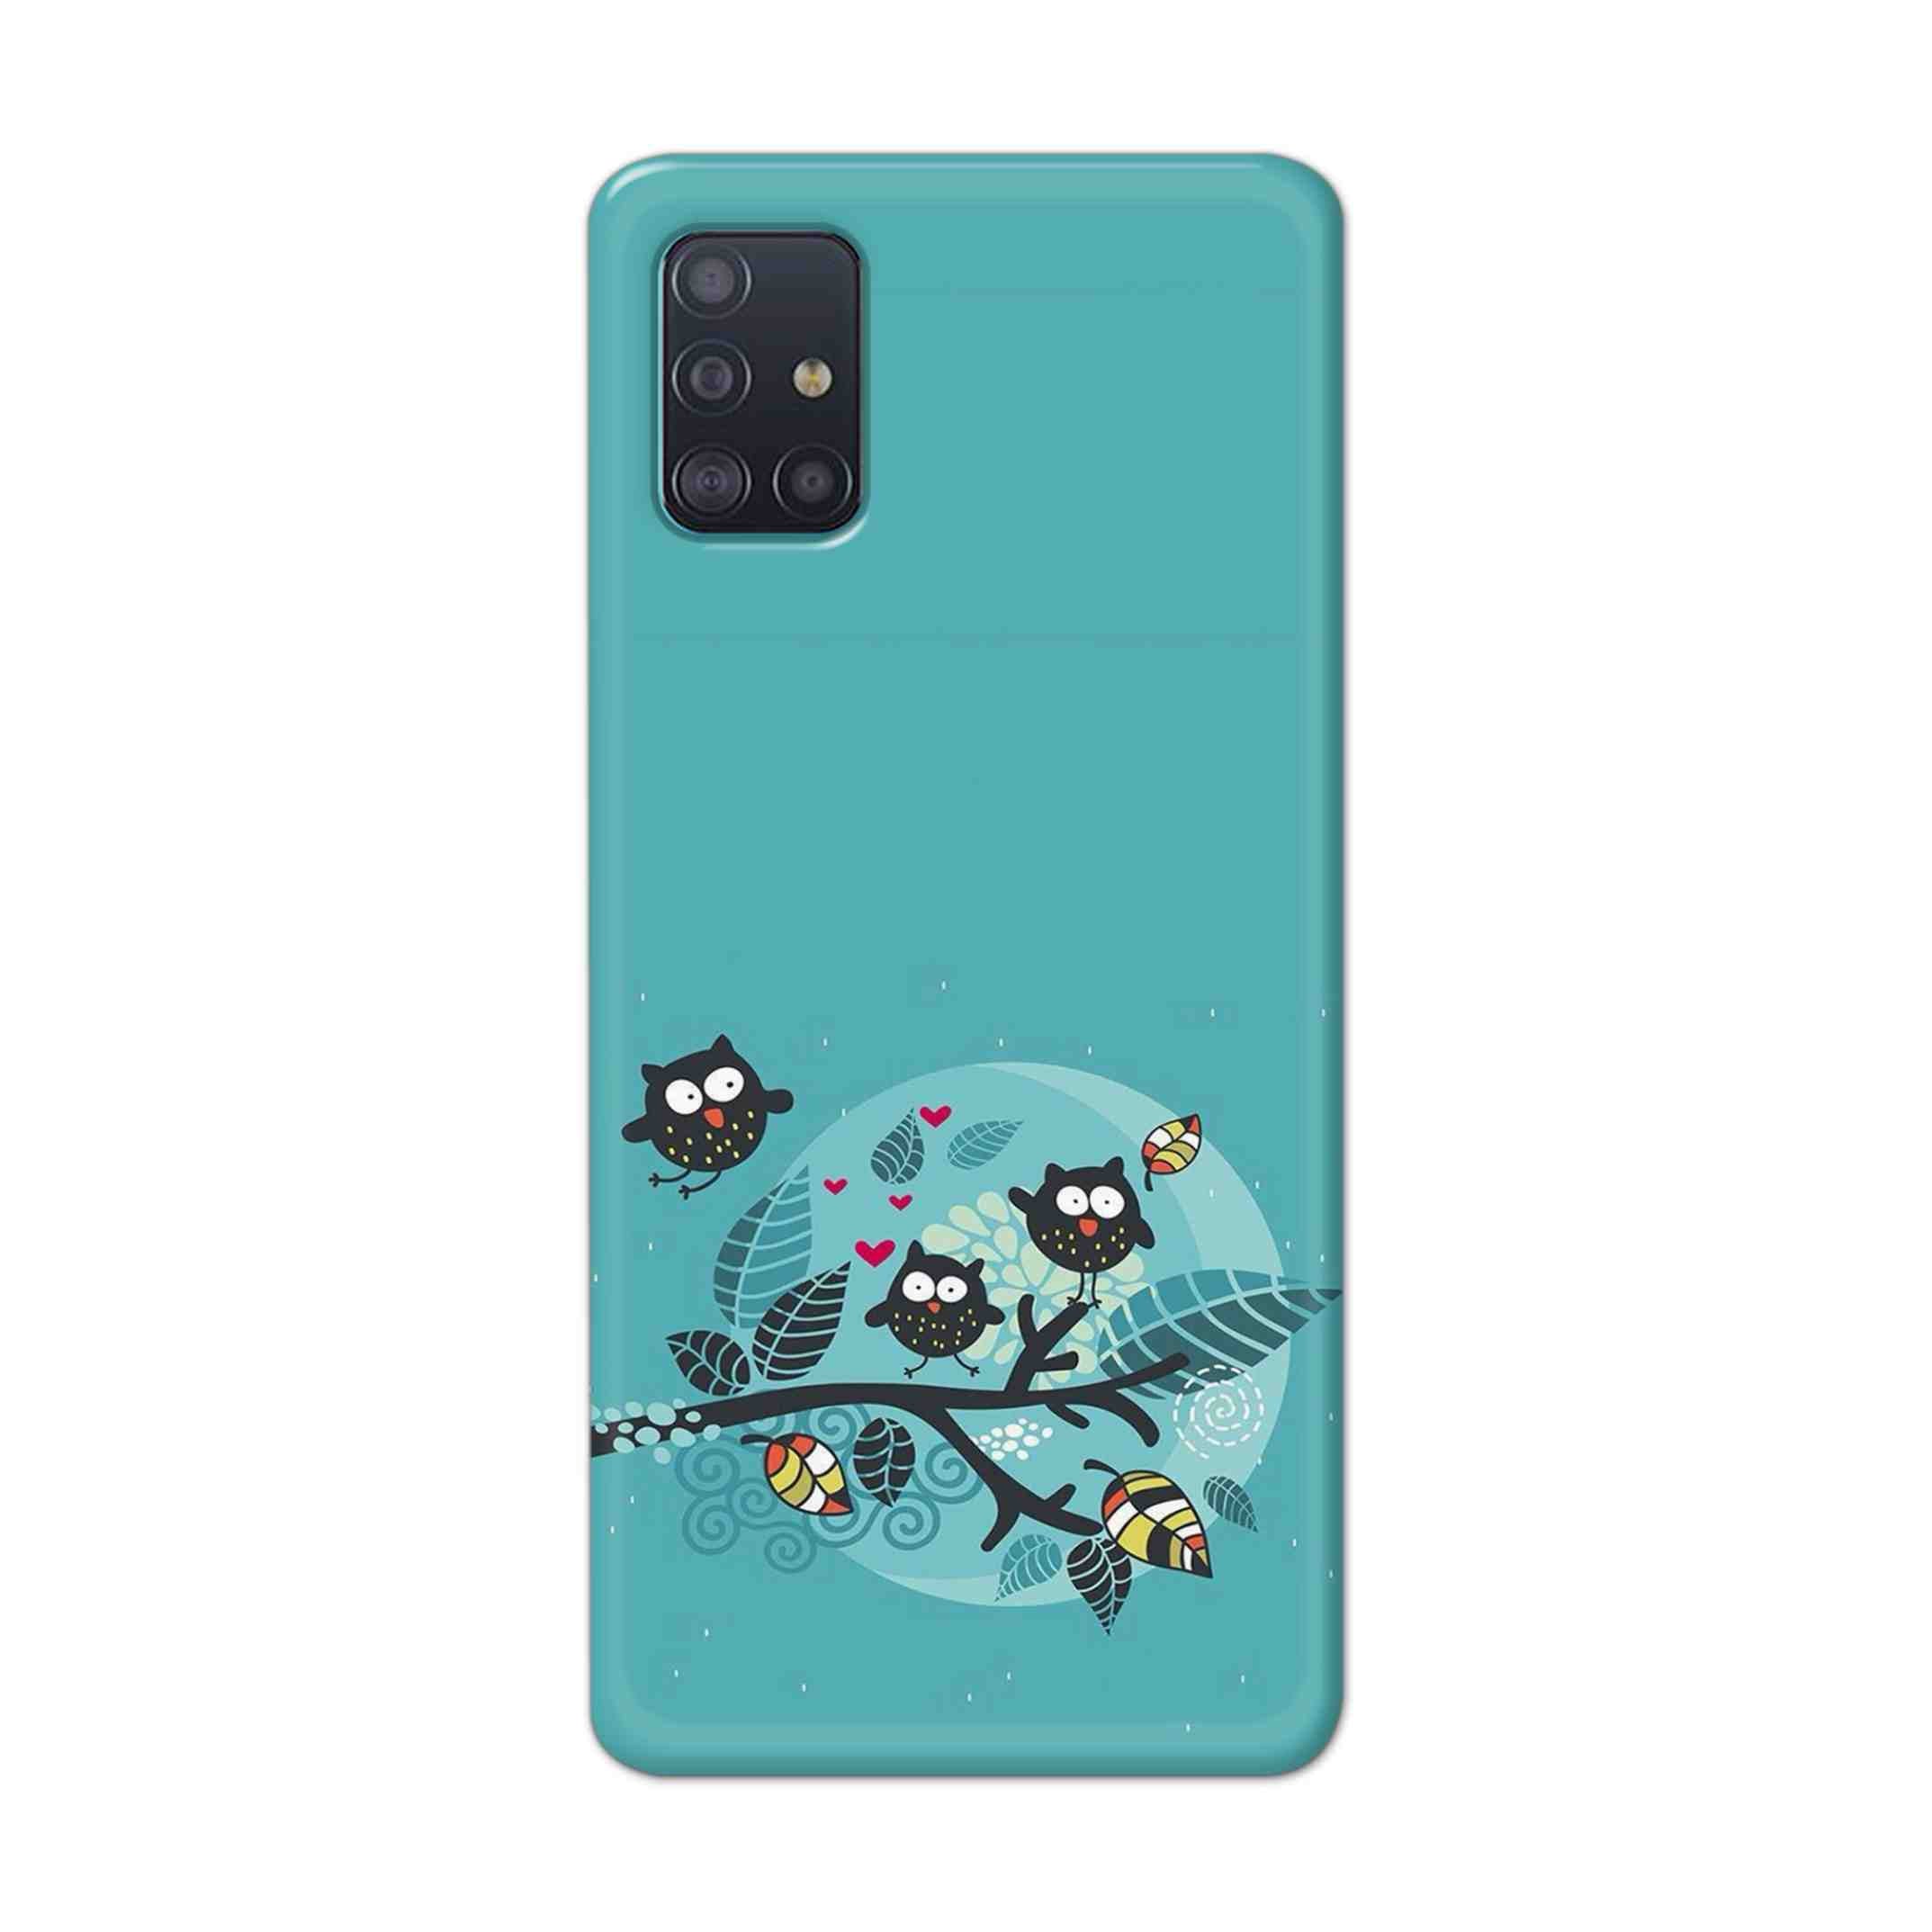 Buy Owl Hard Back Mobile Phone Case Cover For Samsung Galaxy A71 Online